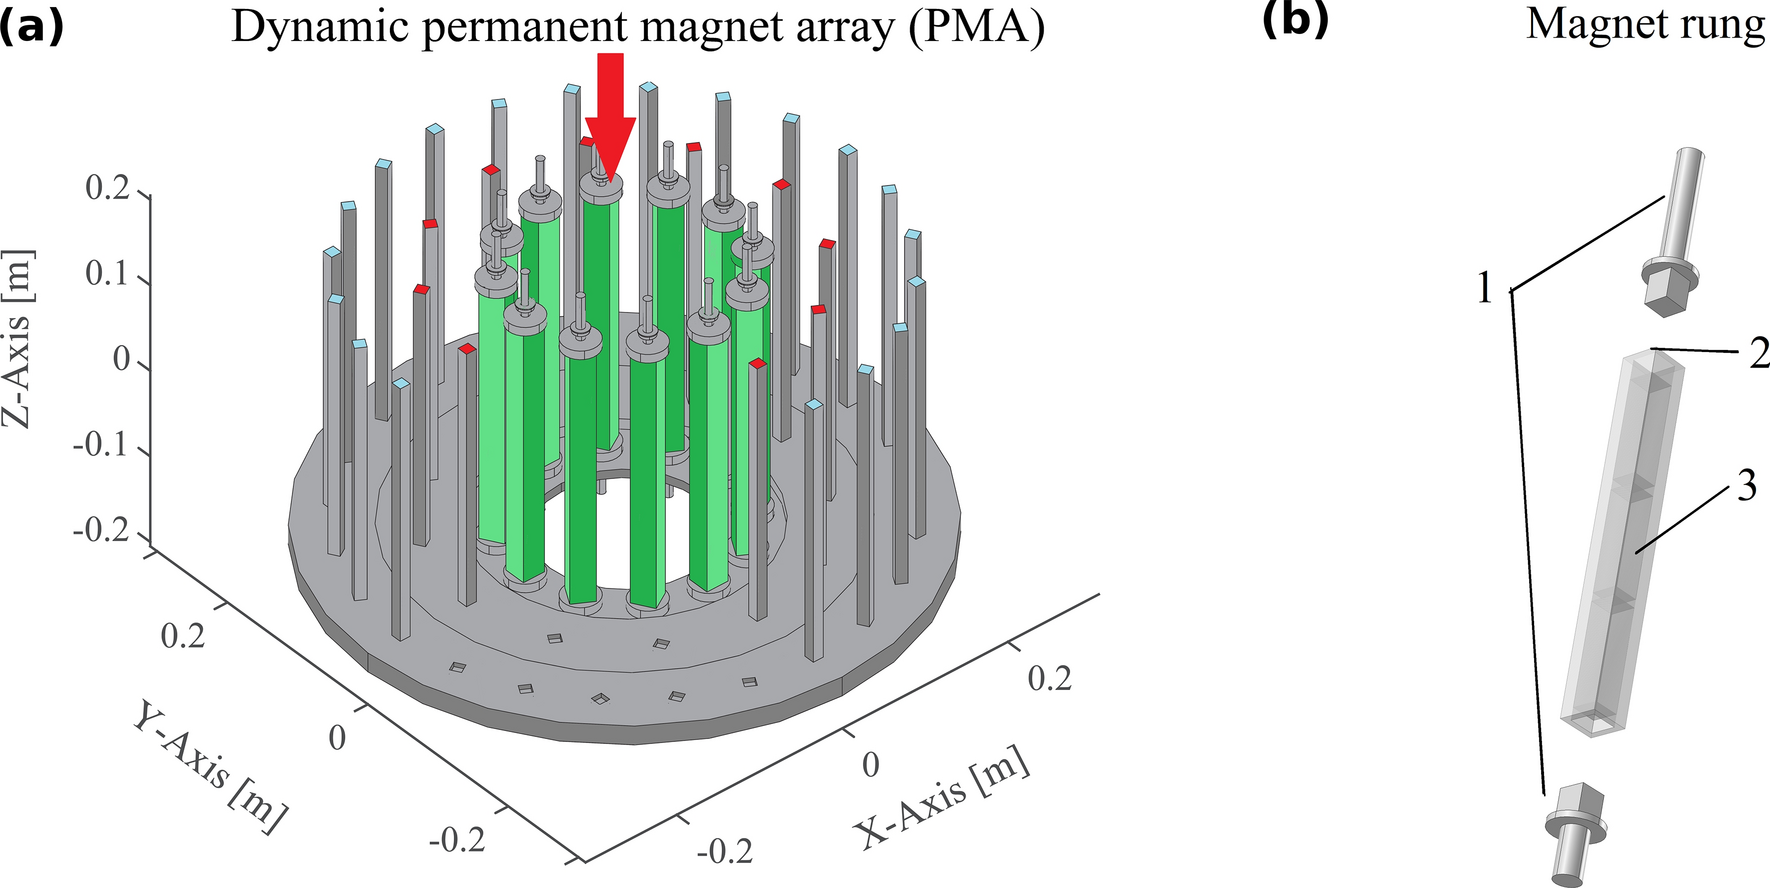 A numerical study of pre-polarisation switching in ultra-low field magnetic  resonance imaging using dynamic permanent magnet arrays | Scientific Reports